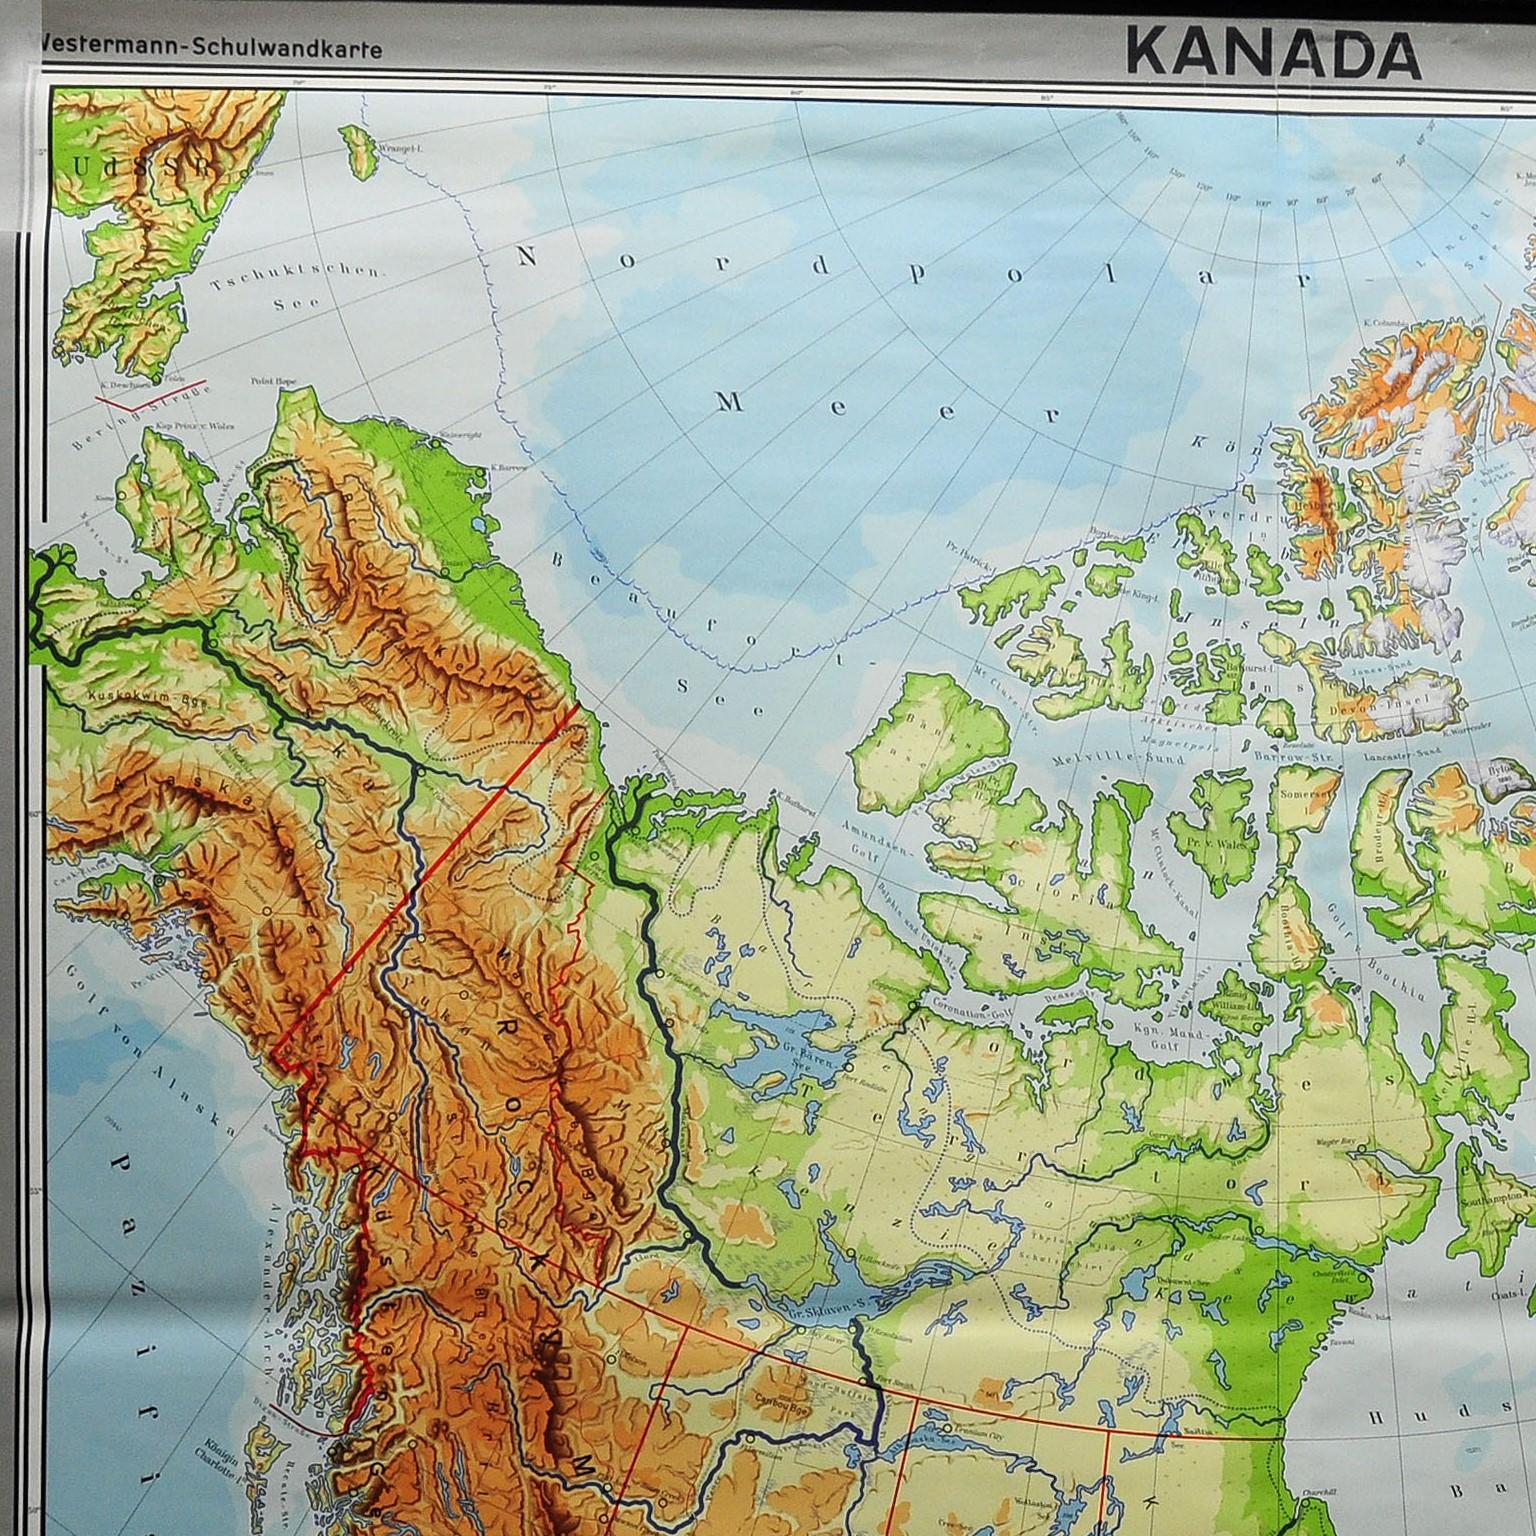 A classical pull-down map of Canada and Greenland (North American Continent). Used as teaching material in German schools. Colorful print on paper reinforced with canvas. Published by Georg Westermann, Braunschweig. This wallchart is a wonderful